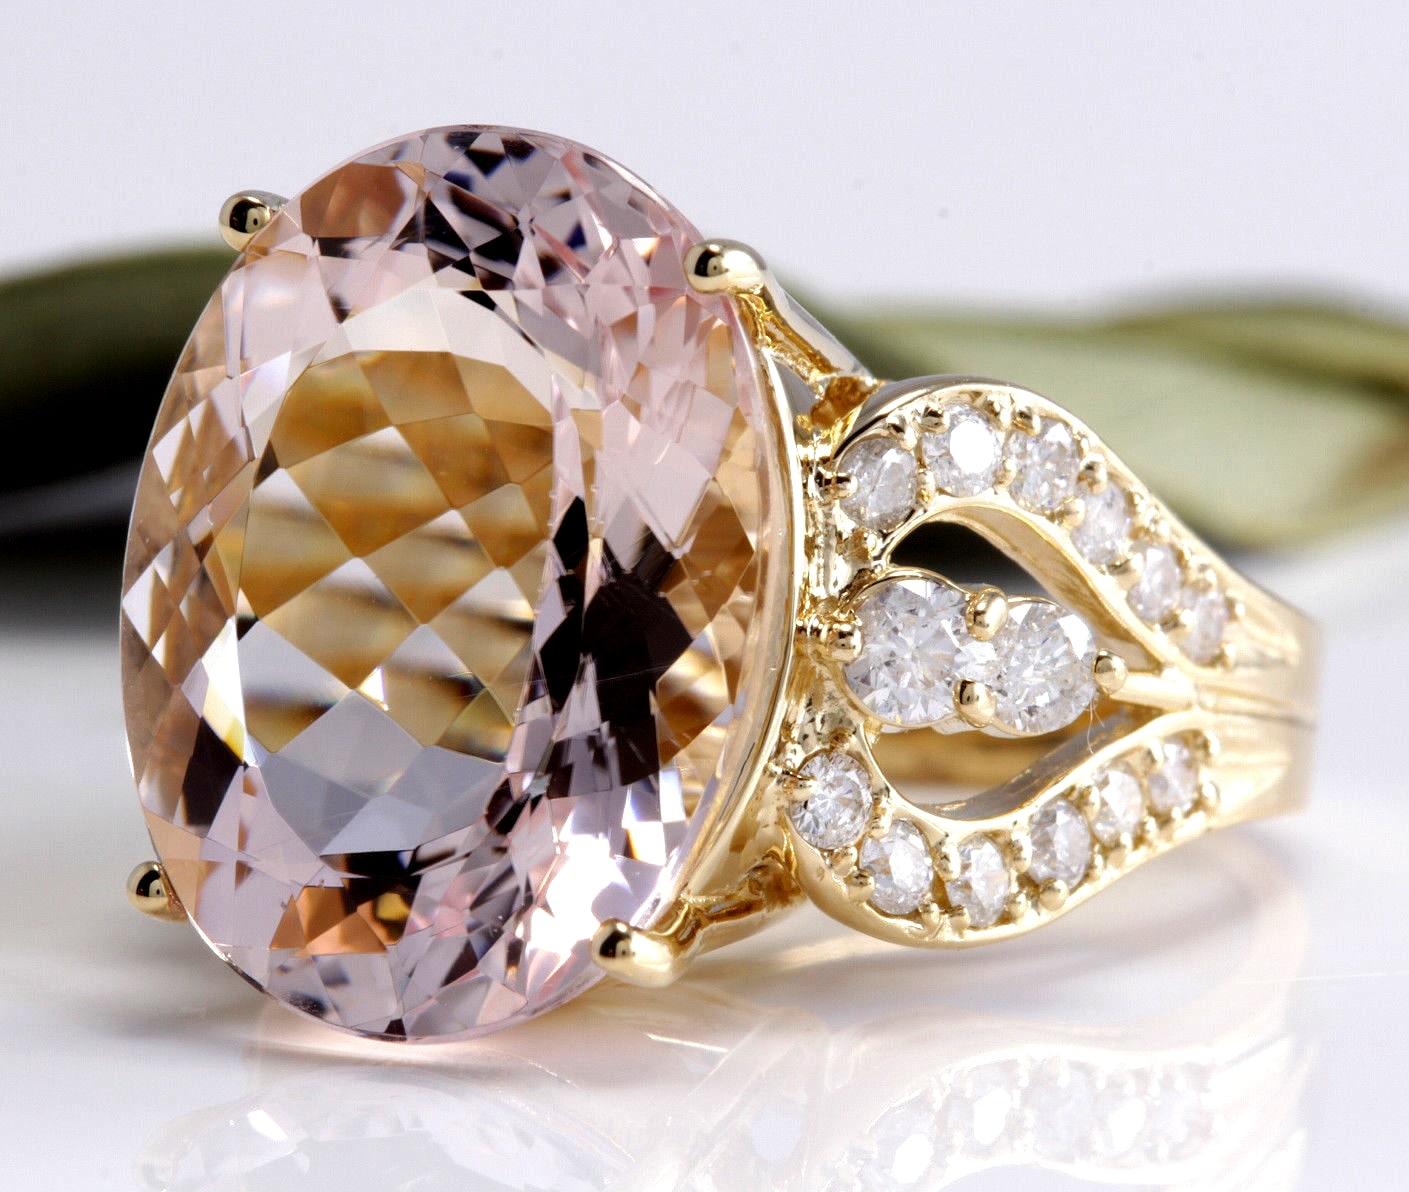 12.00 Carats Exquisite Natural Morganite and Diamond 14K Solid Yellow Gold Ring

Suggested Replacement Value: $7,900.00

Total Natural Oval Shaped Morganite Weights: Approx. 11.00 Carats 

Morganite Measures: Approx. 16.00 x 12.00mm

Natural Round